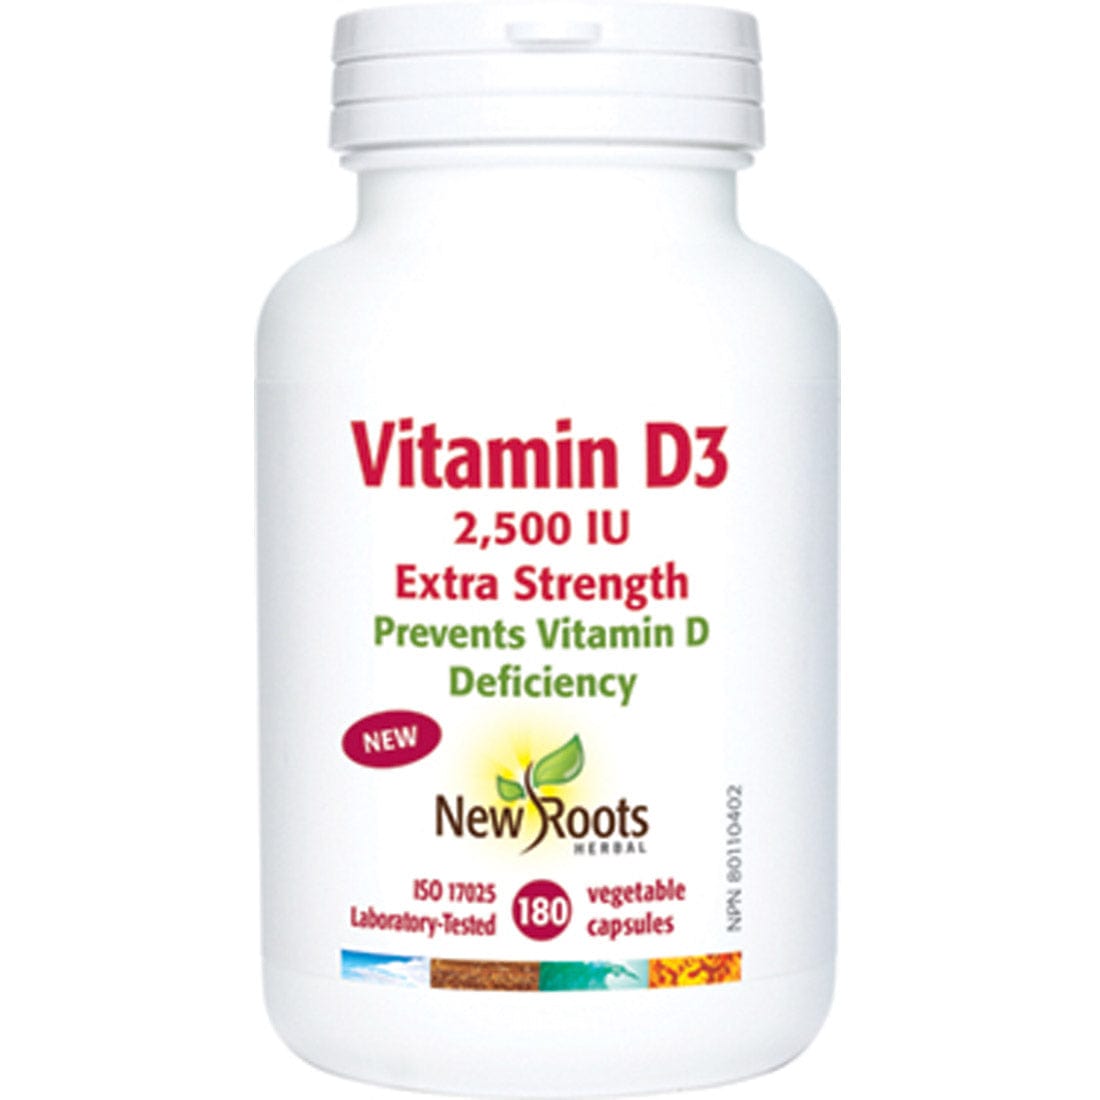 New Roots Vitamin D3 2,500 IU Extra Strength (Capsules)